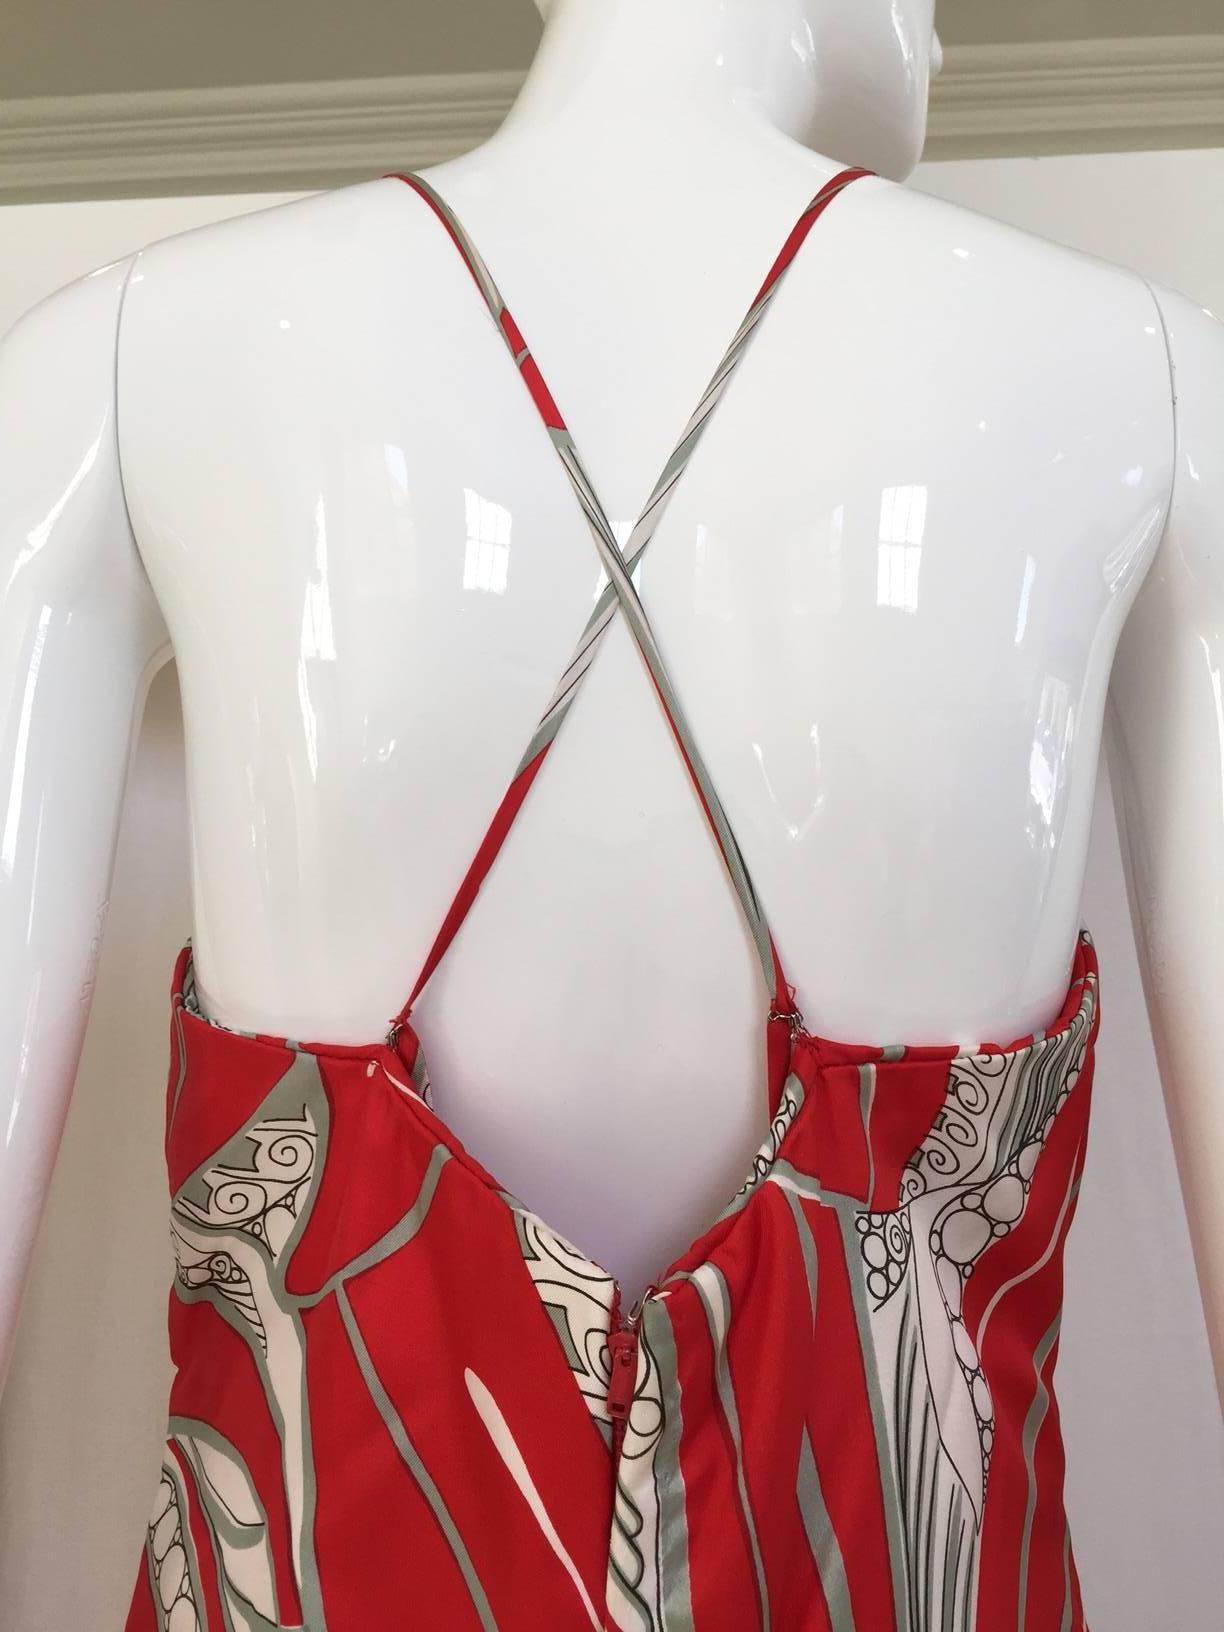 Women's 1970s Adele Simpson red and grey silk dress with cape